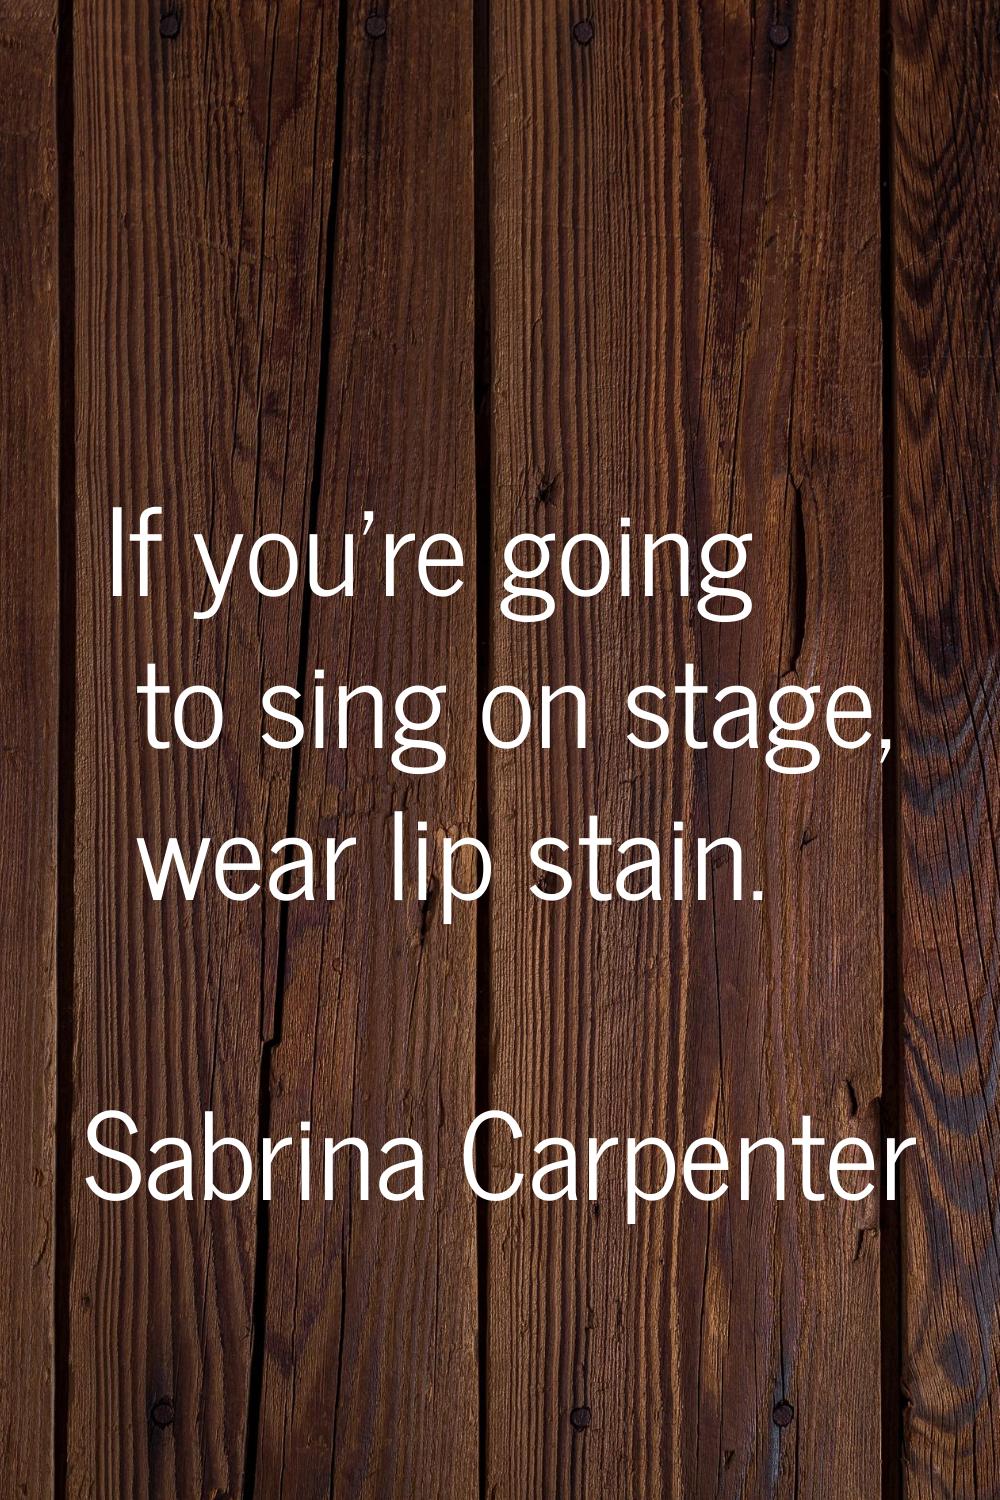 If you're going to sing on stage, wear lip stain.